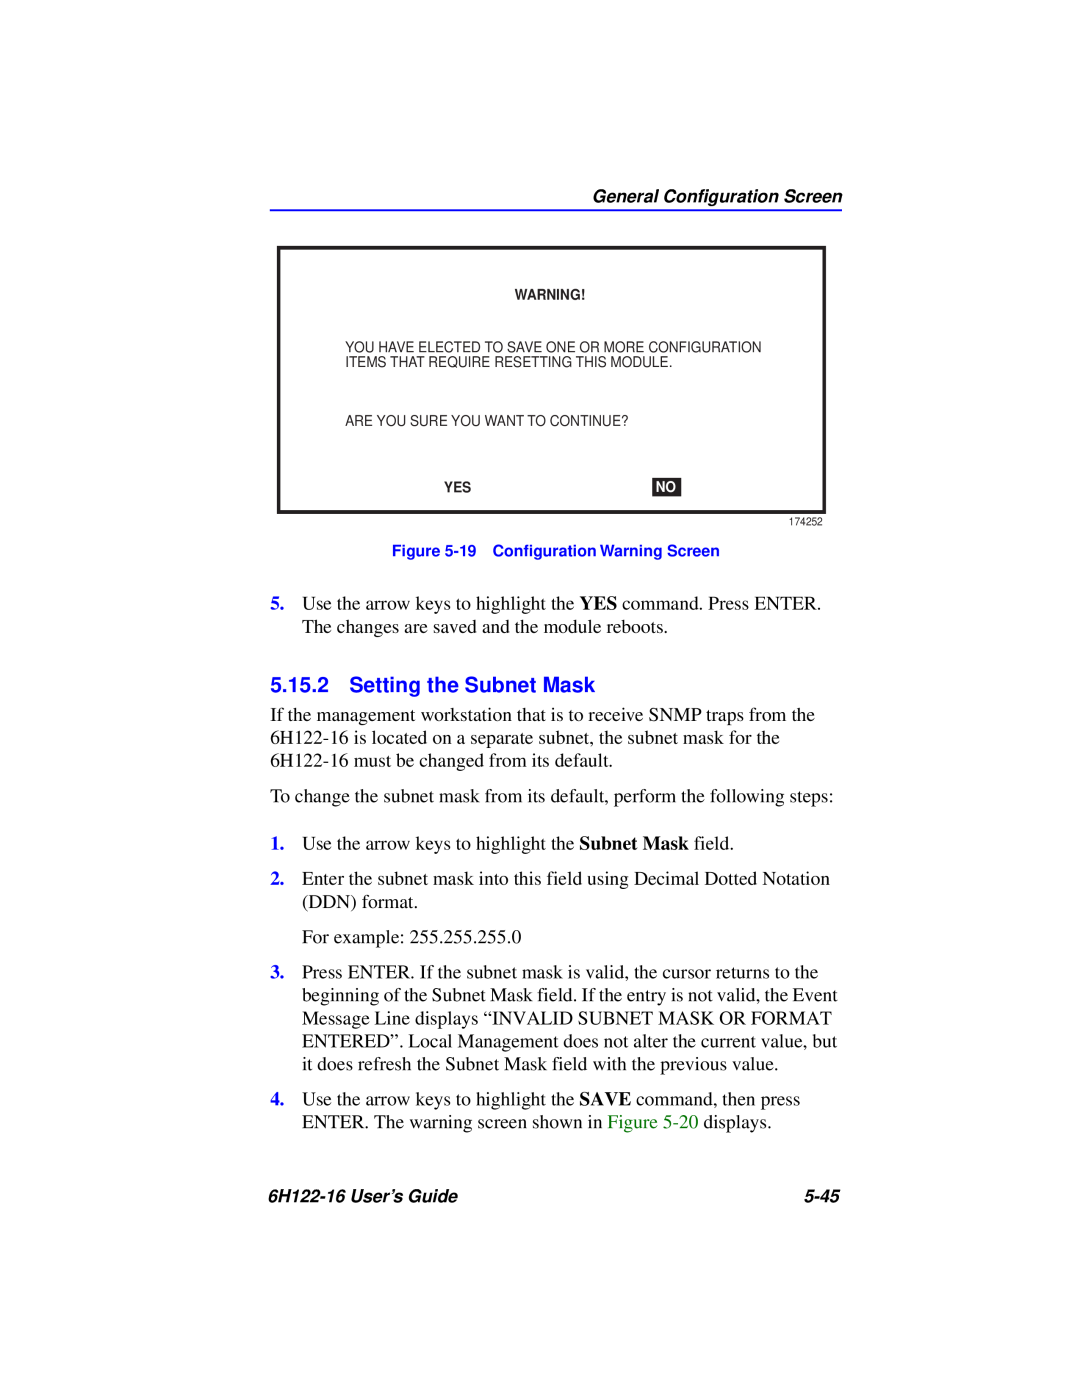 Cabletron Systems 6H122-16 manual Setting the Subnet Mask, 19 Conﬁguration Warning Screen 